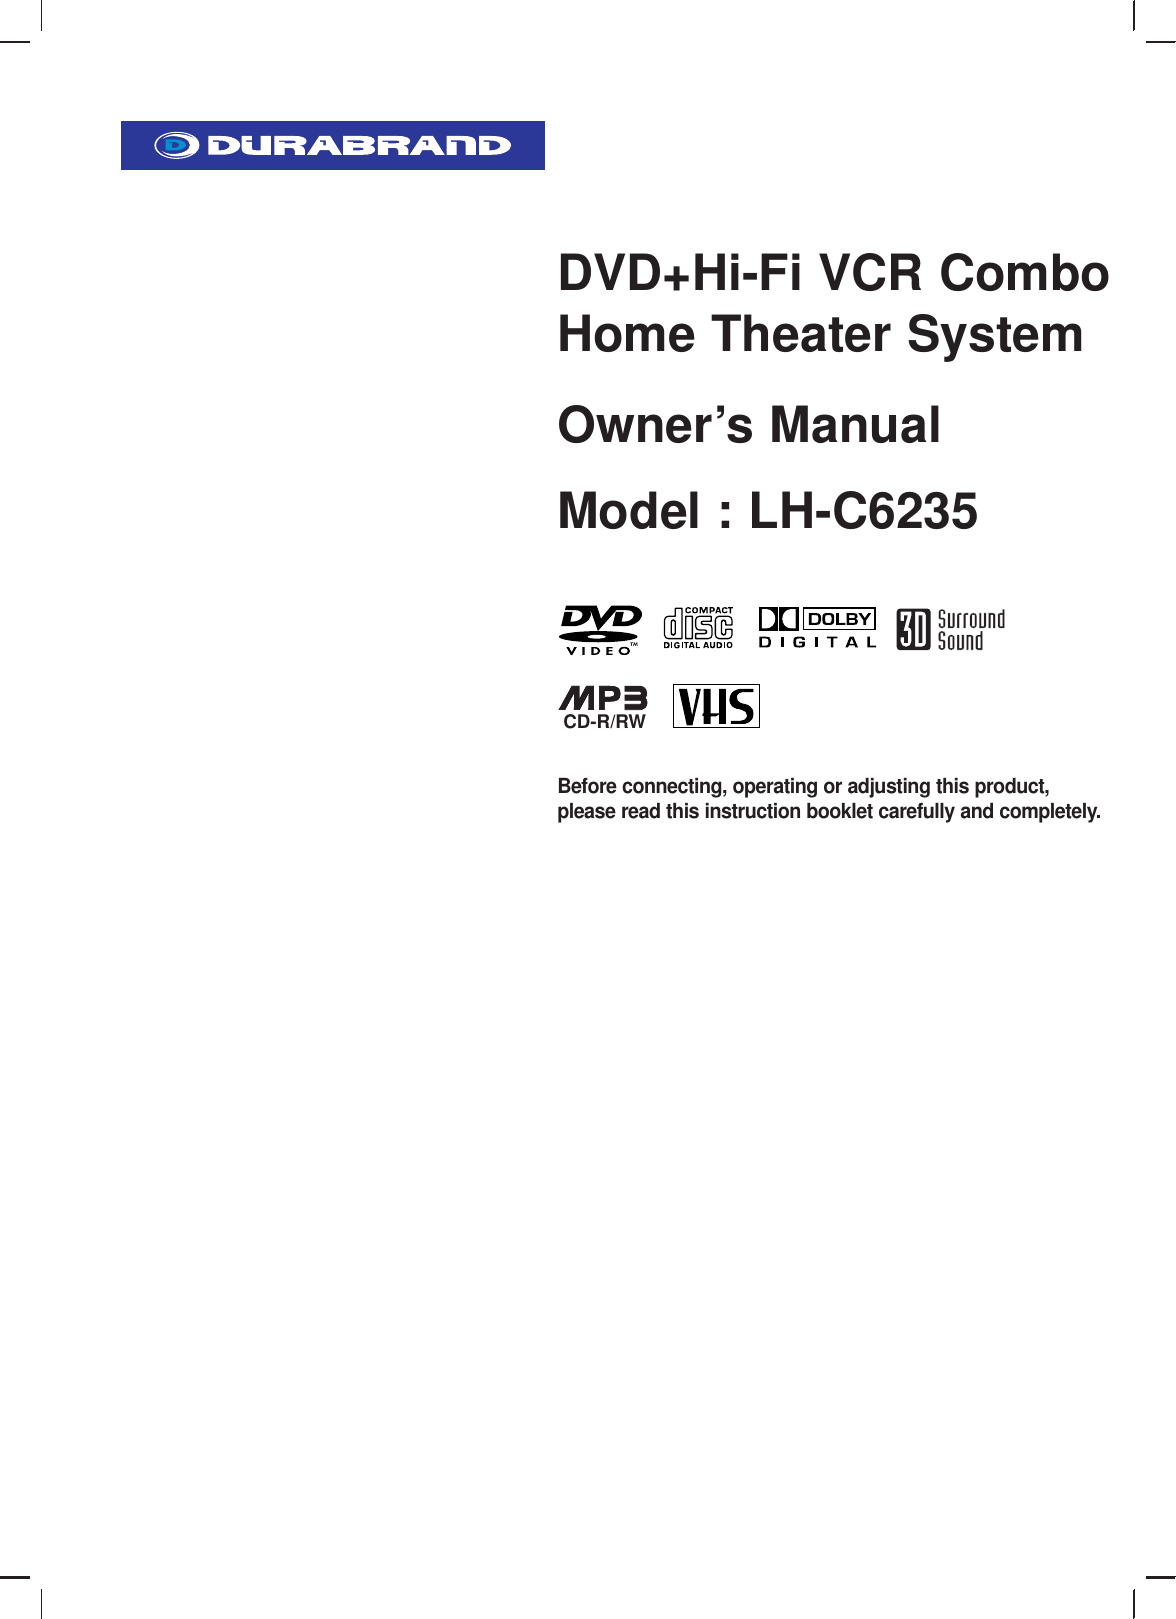 DVD+Hi-Fi VCR ComboHome Theater SystemOwner’s ManualModel : LH-C6235Before connecting, operating or adjusting this product,please read this instruction booklet carefully and completely.CD-R/RW